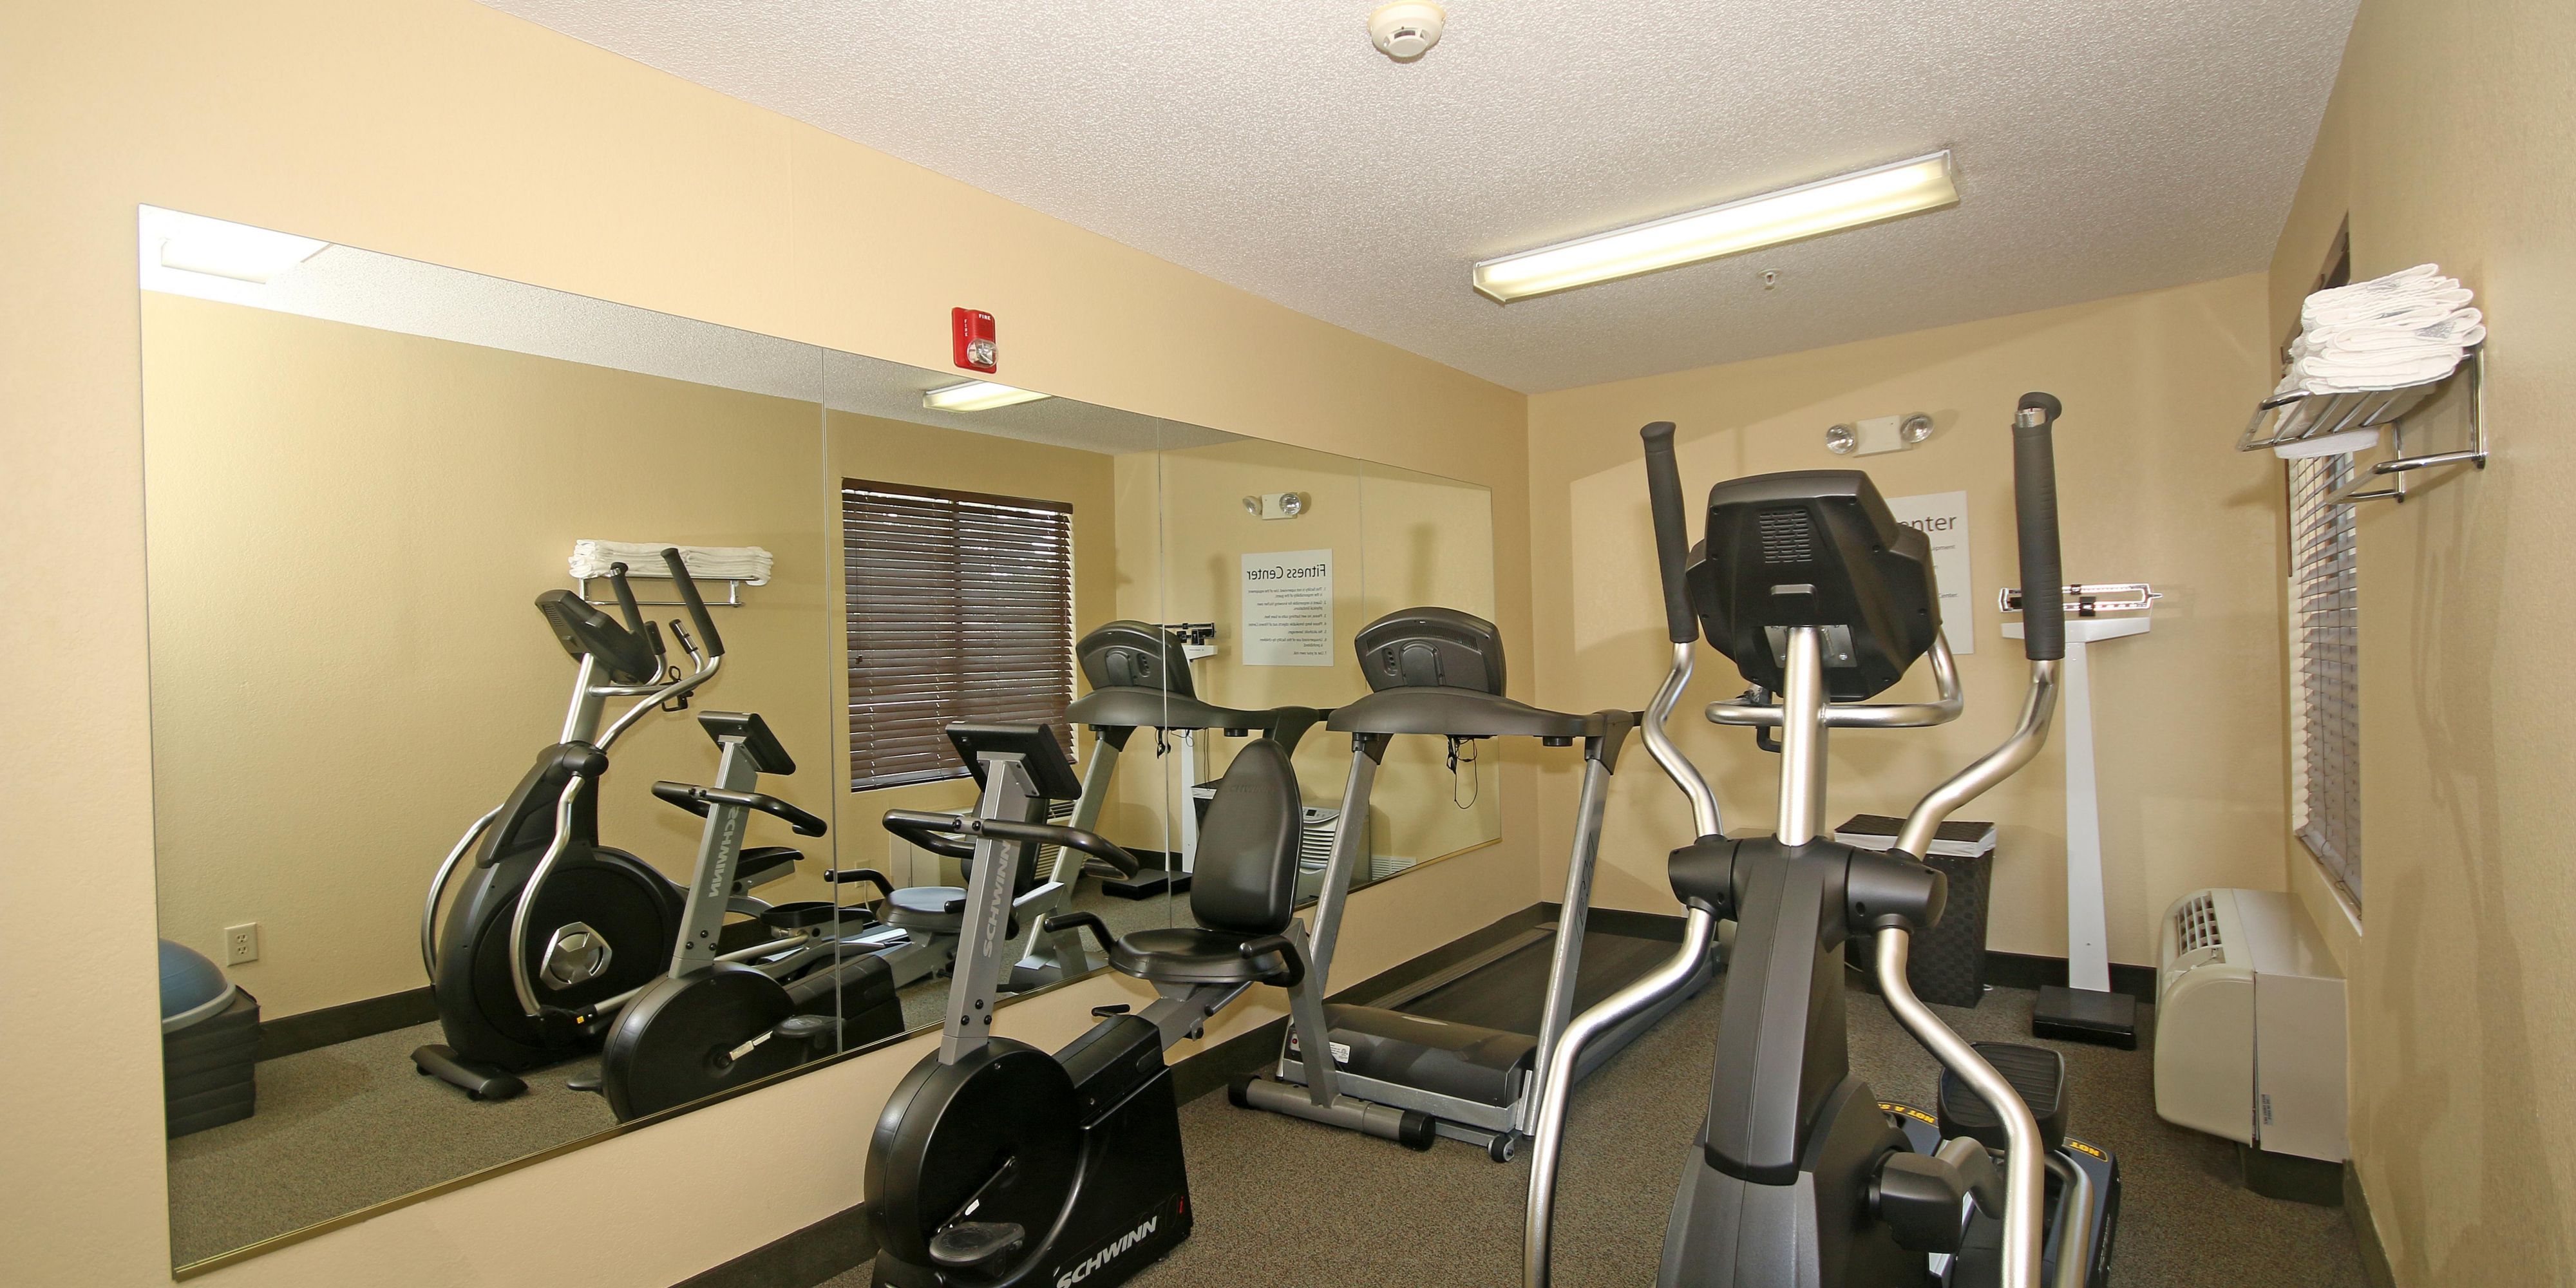 Fit travelers, don't sweat it, we've got you covered! Enjoy an invigorating workout in our complimentary Fitness Center. You'll find treadmills, elliptical machines, free weights or a stationary bicycle available just for you! Stay smart and fit when you stay with us!